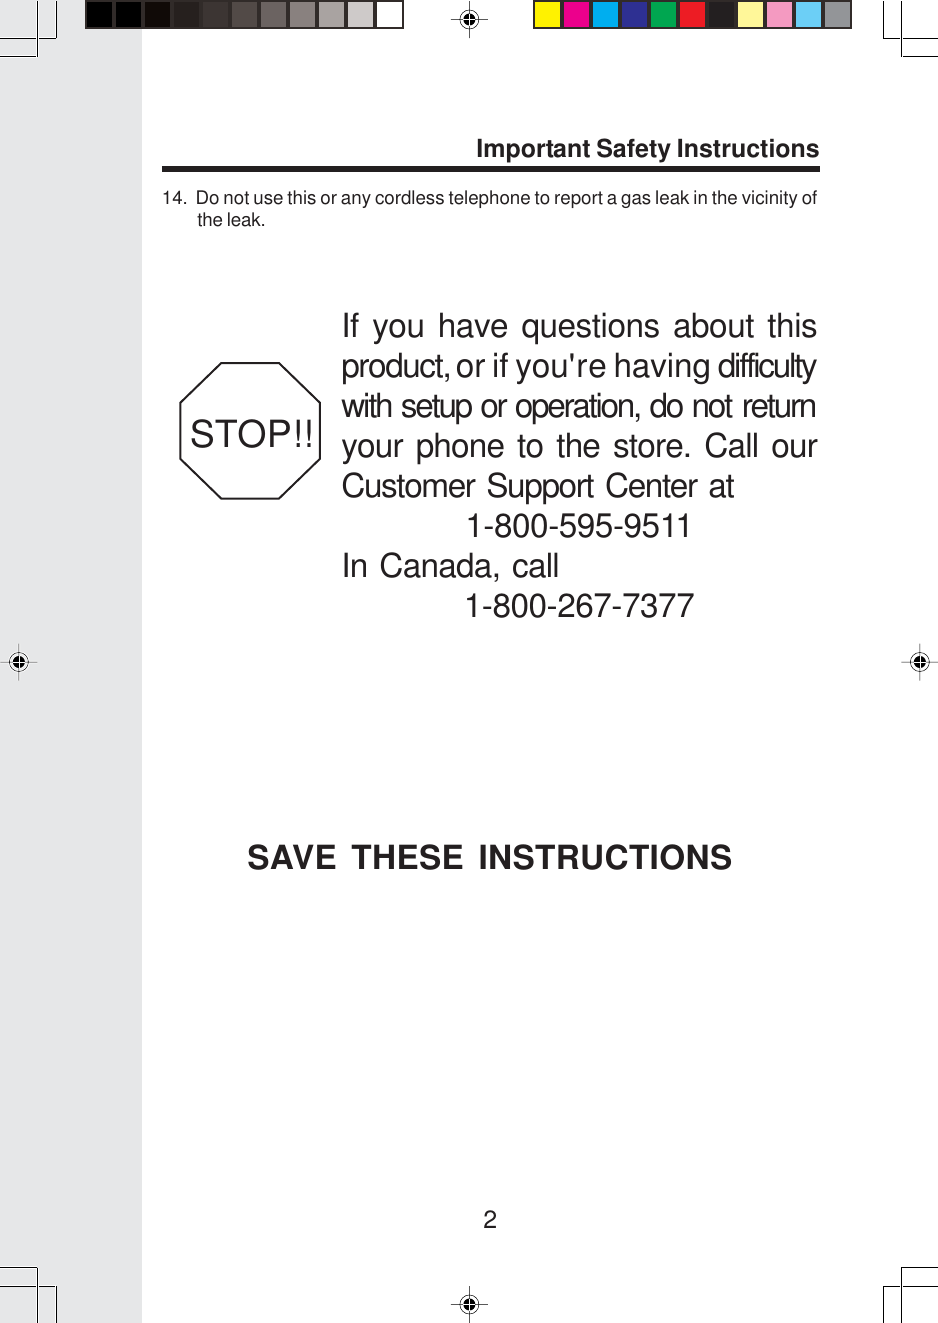 2Important Safety InstructionsIf you have questions about thisproduct, or if you&apos;re having difficultywith setup or operation, do not returnyour phone to the store. Call ourCustomer Support Center at1-800-595-9511In Canada, call1-800-267-7377STOP!!14.  Do not use this or any cordless telephone to report a gas leak in the vicinity ofthe leak.SAVE THESE INSTRUCTIONS